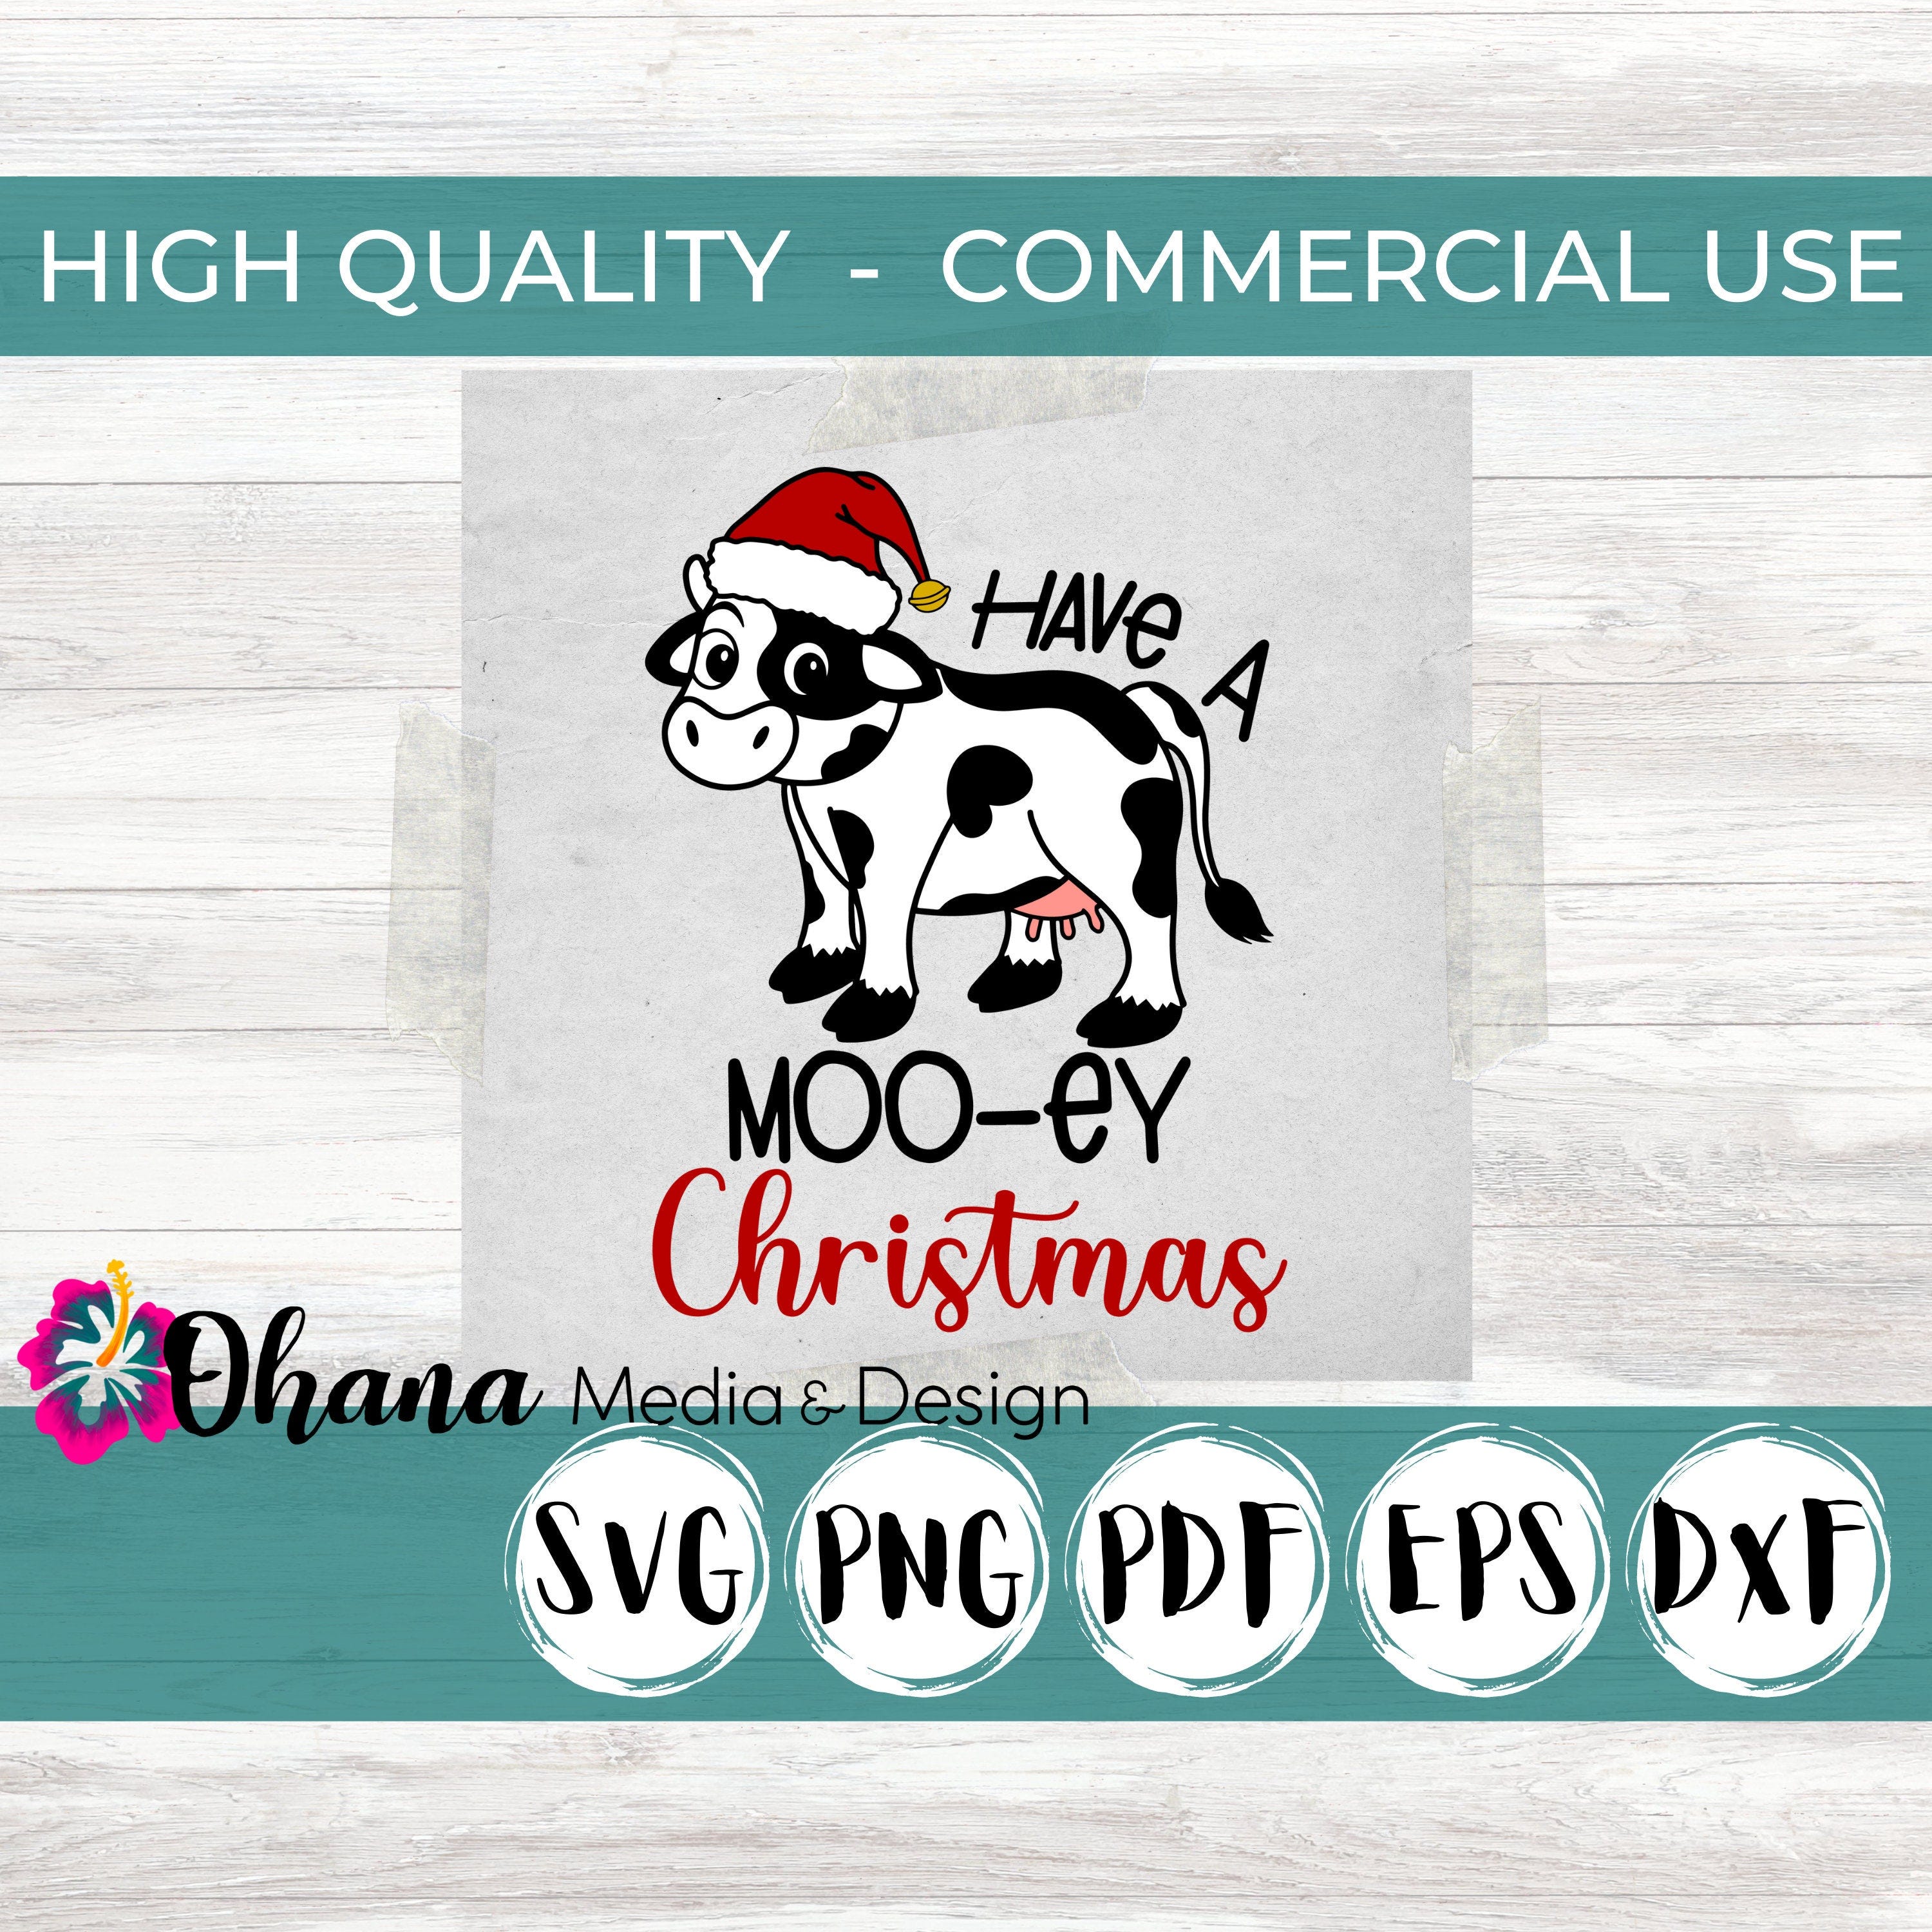 Have A Mooey Christmas Funny Cow With Santa Hat Design Commercial Use Instant Download Svg, Png, Pdf, Eps, Dxf